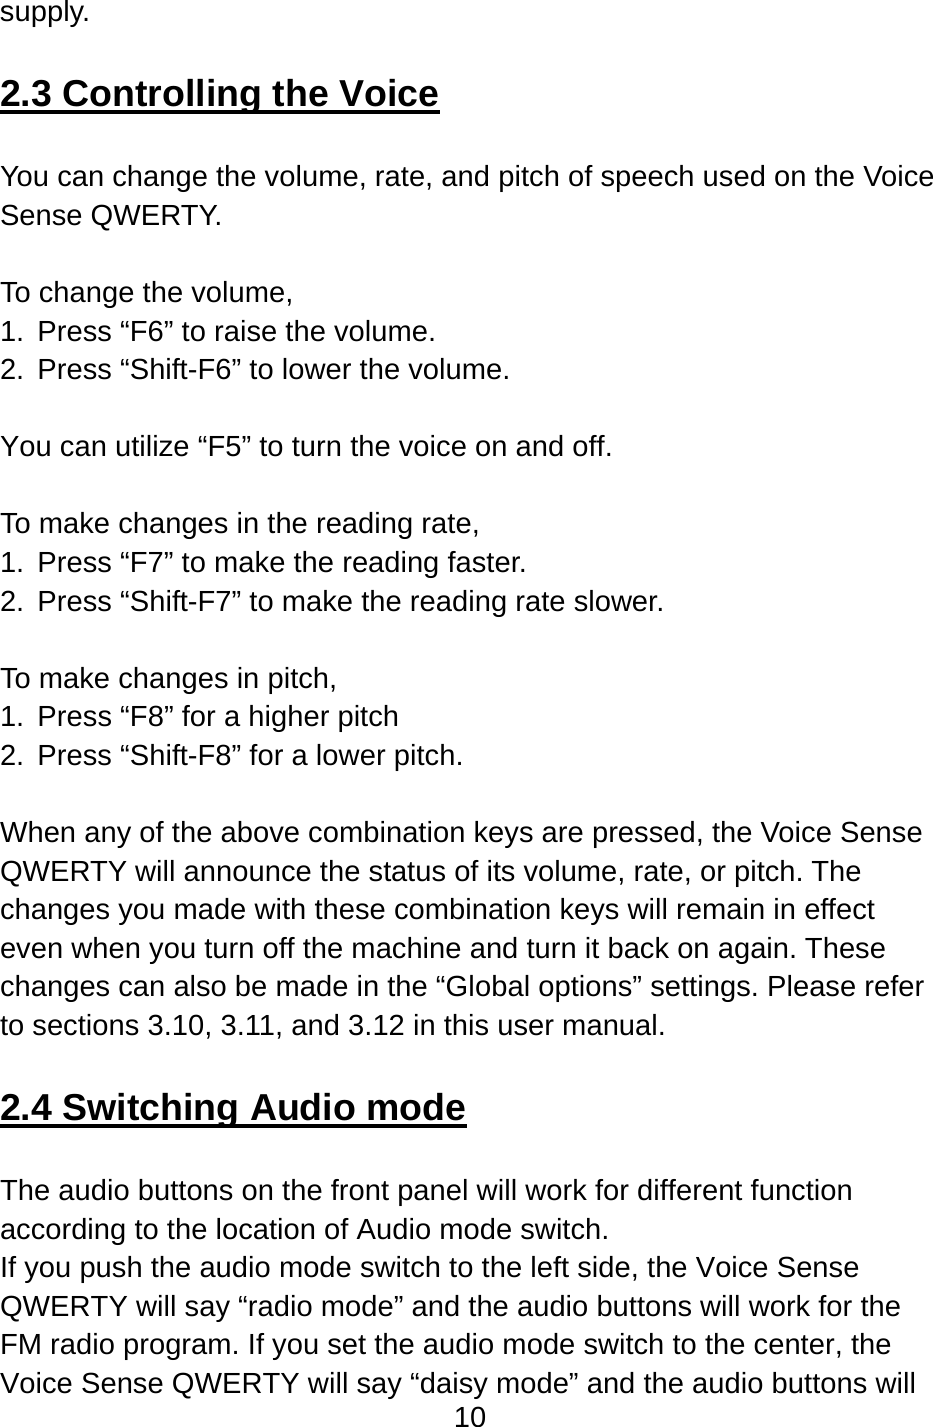 10  supply.  2.3 Controlling the Voice  You can change the volume, rate, and pitch of speech used on the Voice Sense QWERTY.    To change the volume,   1.  Press “F6” to raise the volume.   2.  Press “Shift-F6” to lower the volume.    You can utilize “F5” to turn the voice on and off.  To make changes in the reading rate,   1.  Press “F7” to make the reading faster.     2.  Press “Shift-F7” to make the reading rate slower.    To make changes in pitch,   1.  Press “F8” for a higher pitch   2. Press “Shift-F8” for a lower pitch.  When any of the above combination keys are pressed, the Voice Sense QWERTY will announce the status of its volume, rate, or pitch. The changes you made with these combination keys will remain in effect even when you turn off the machine and turn it back on again. These changes can also be made in the “Global options” settings. Please refer to sections 3.10, 3.11, and 3.12 in this user manual.  2.4 Switching Audio mode  The audio buttons on the front panel will work for different function according to the location of Audio mode switch. If you push the audio mode switch to the left side, the Voice Sense QWERTY will say “radio mode” and the audio buttons will work for the FM radio program. If you set the audio mode switch to the center, the Voice Sense QWERTY will say “daisy mode” and the audio buttons will 